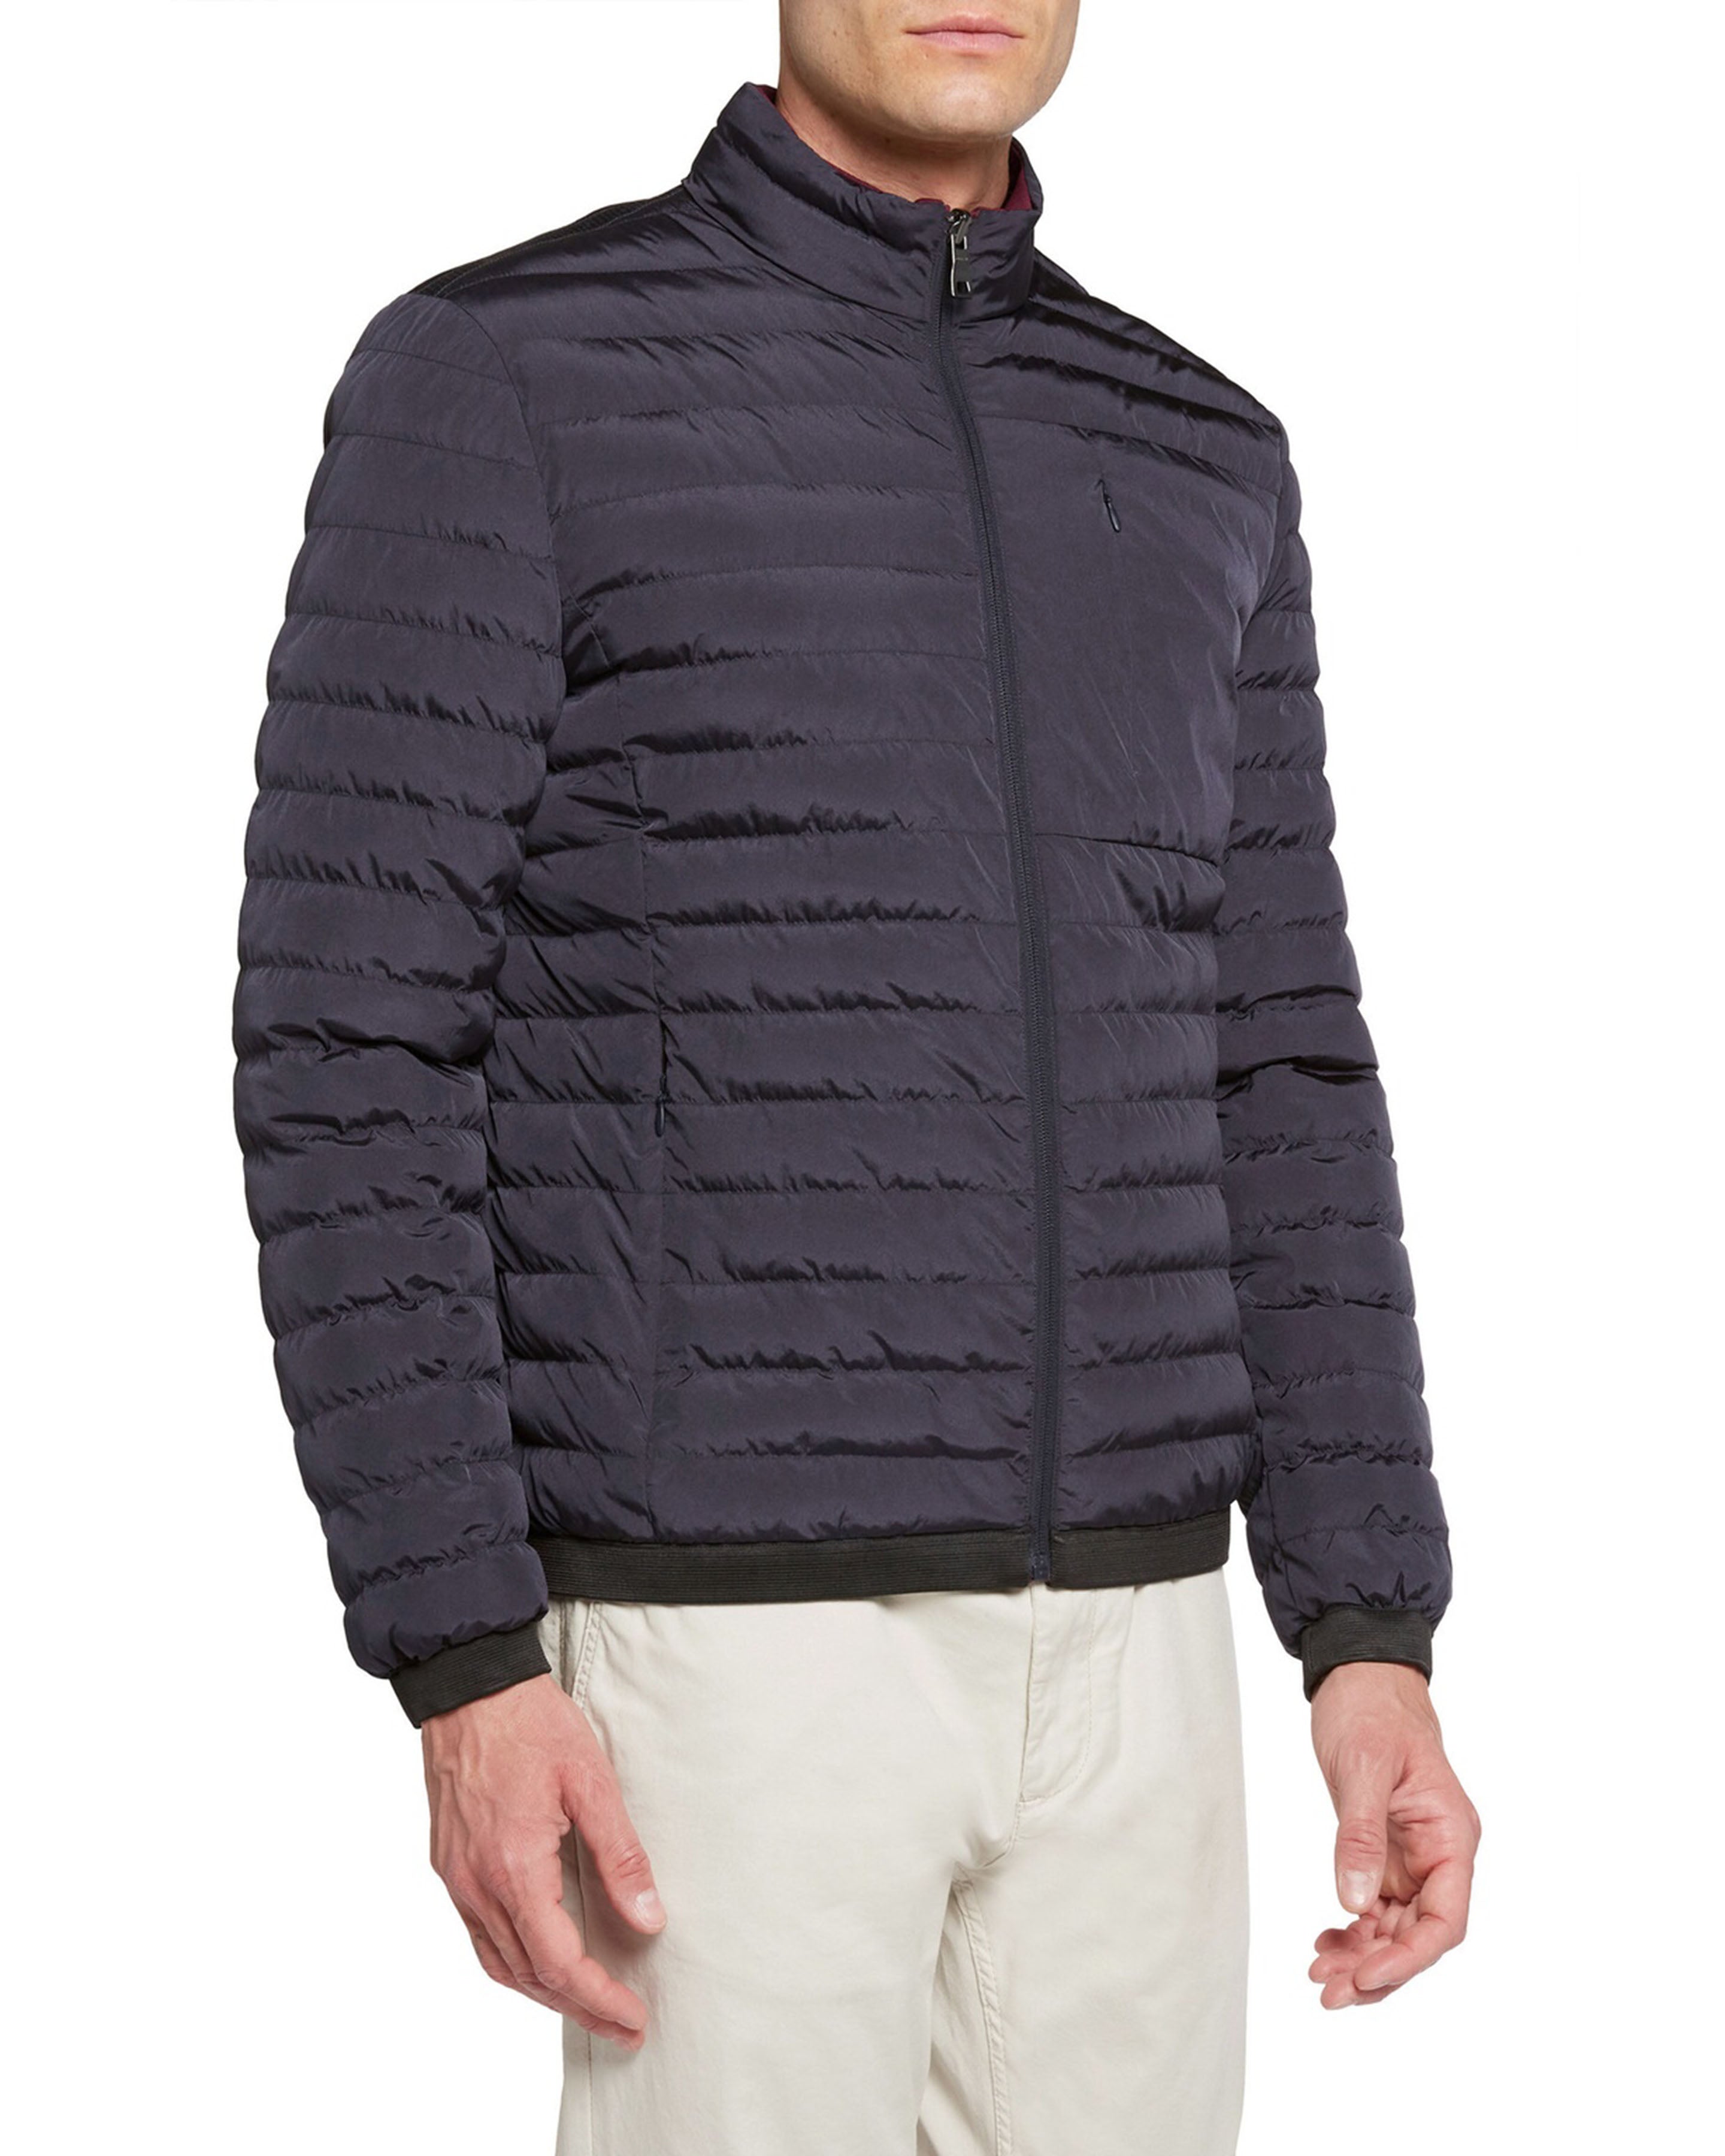 GEOX - GENOVA Reversible Bomber Jacket in Sky Captain Blue and Grape M3528ATC172F1694